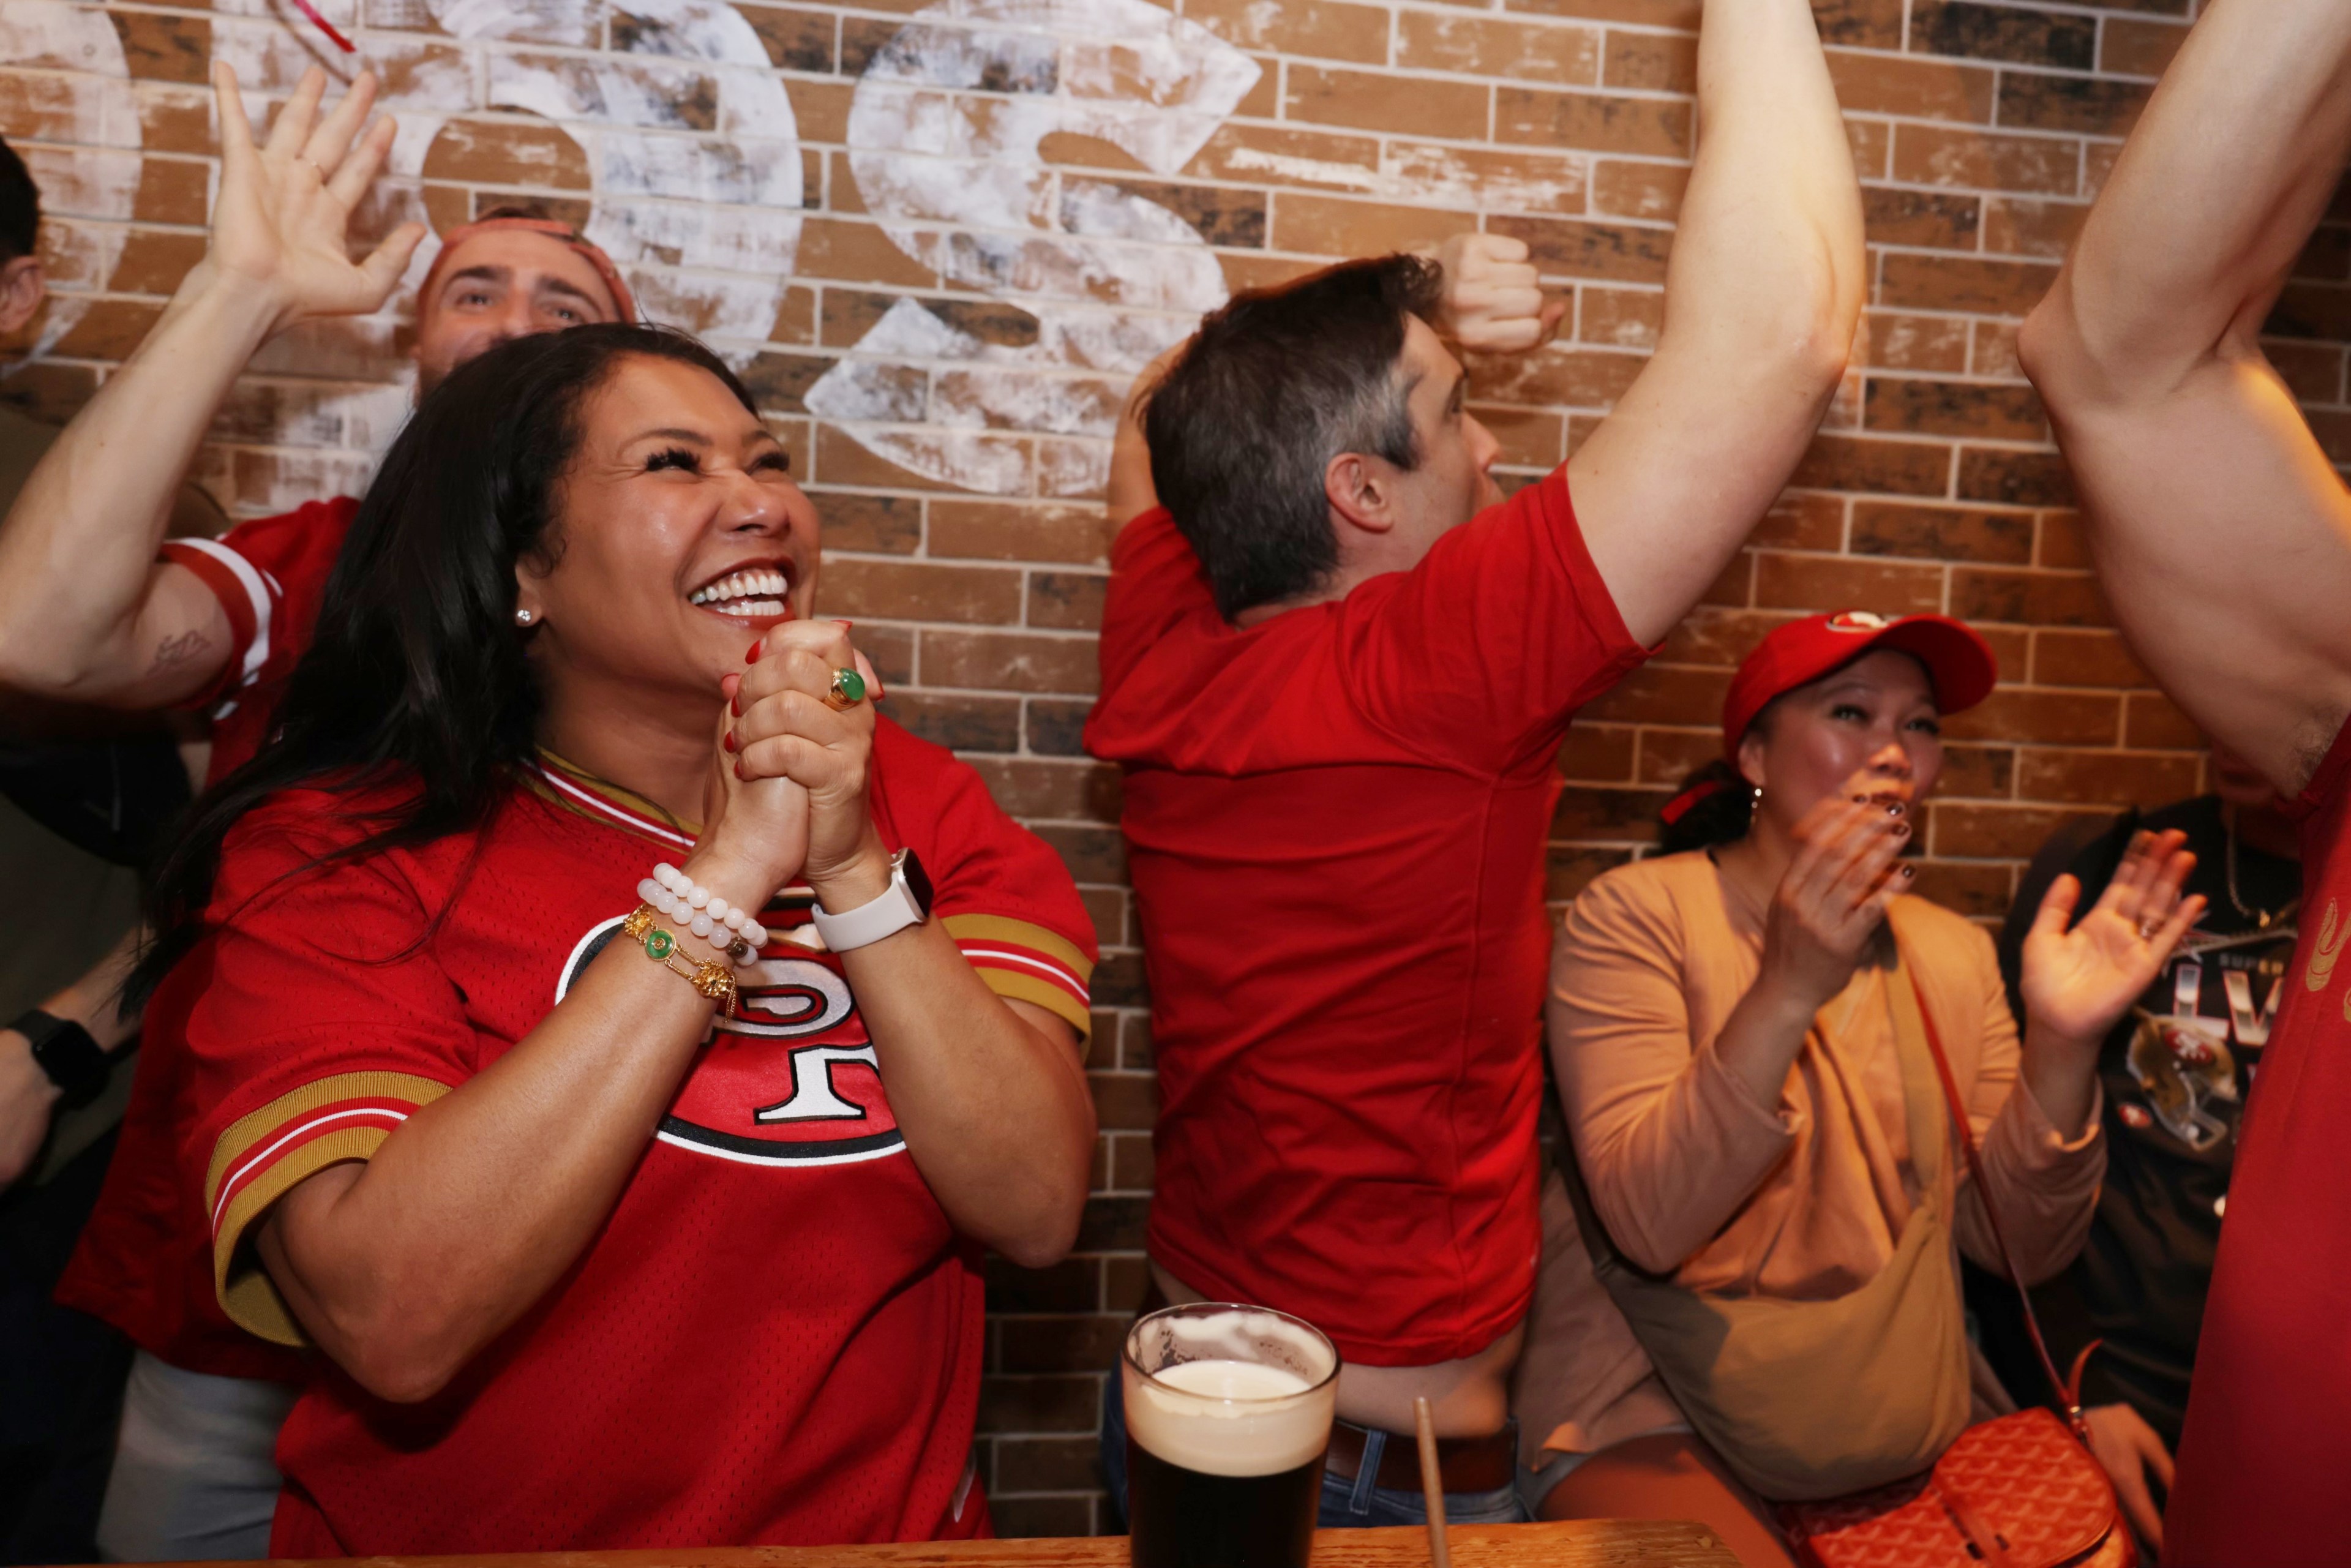 A group of fans in red jerseys celebrates joyously in a bar.